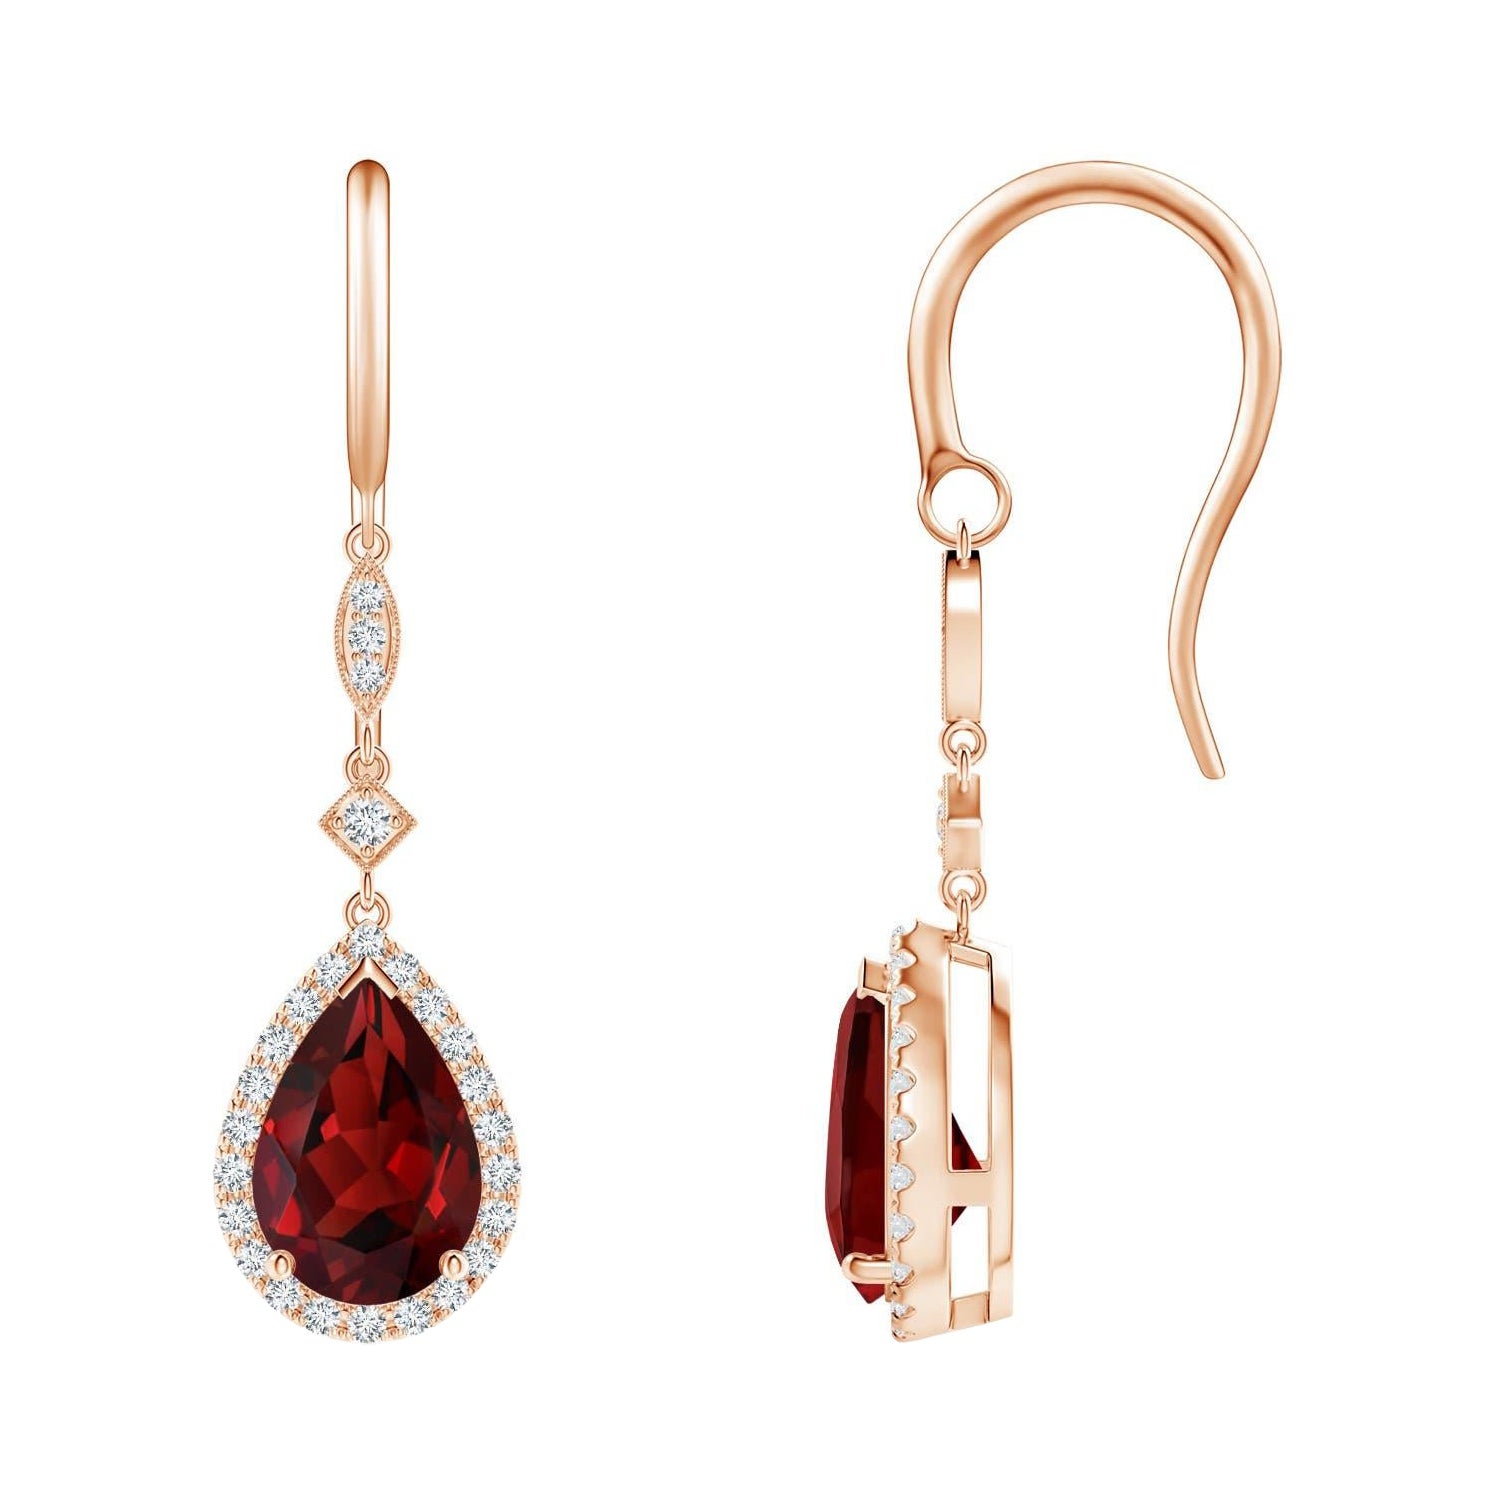 Natural Pear-Shaped 3ct Garnet Drop Earrings with Diamond in 14K Rose Gold For Sale